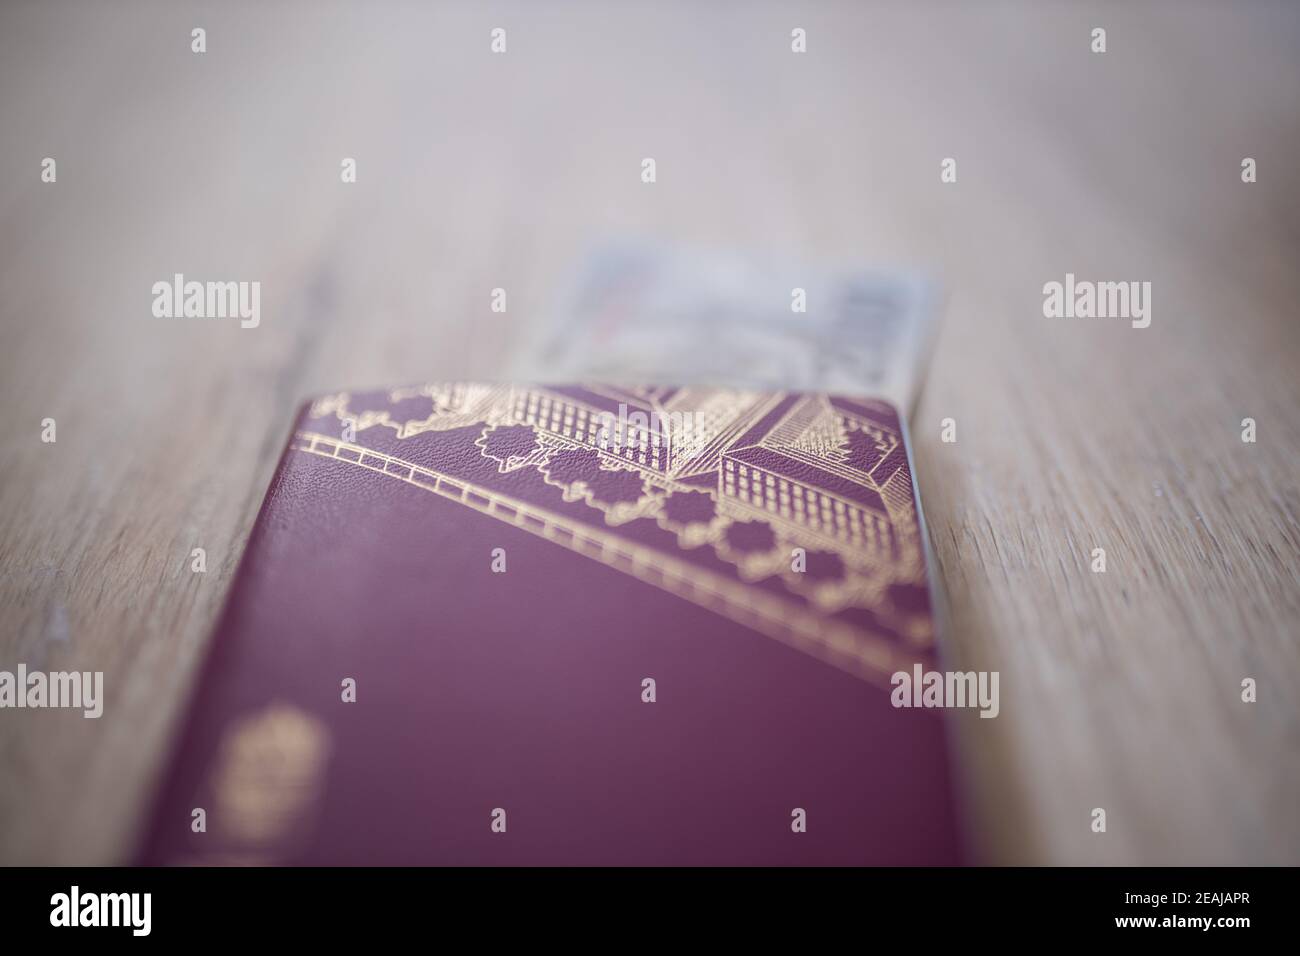 Sweden Passport with a Two Thousand Indonesian Rupees Bill Partially Inside Stock Photo